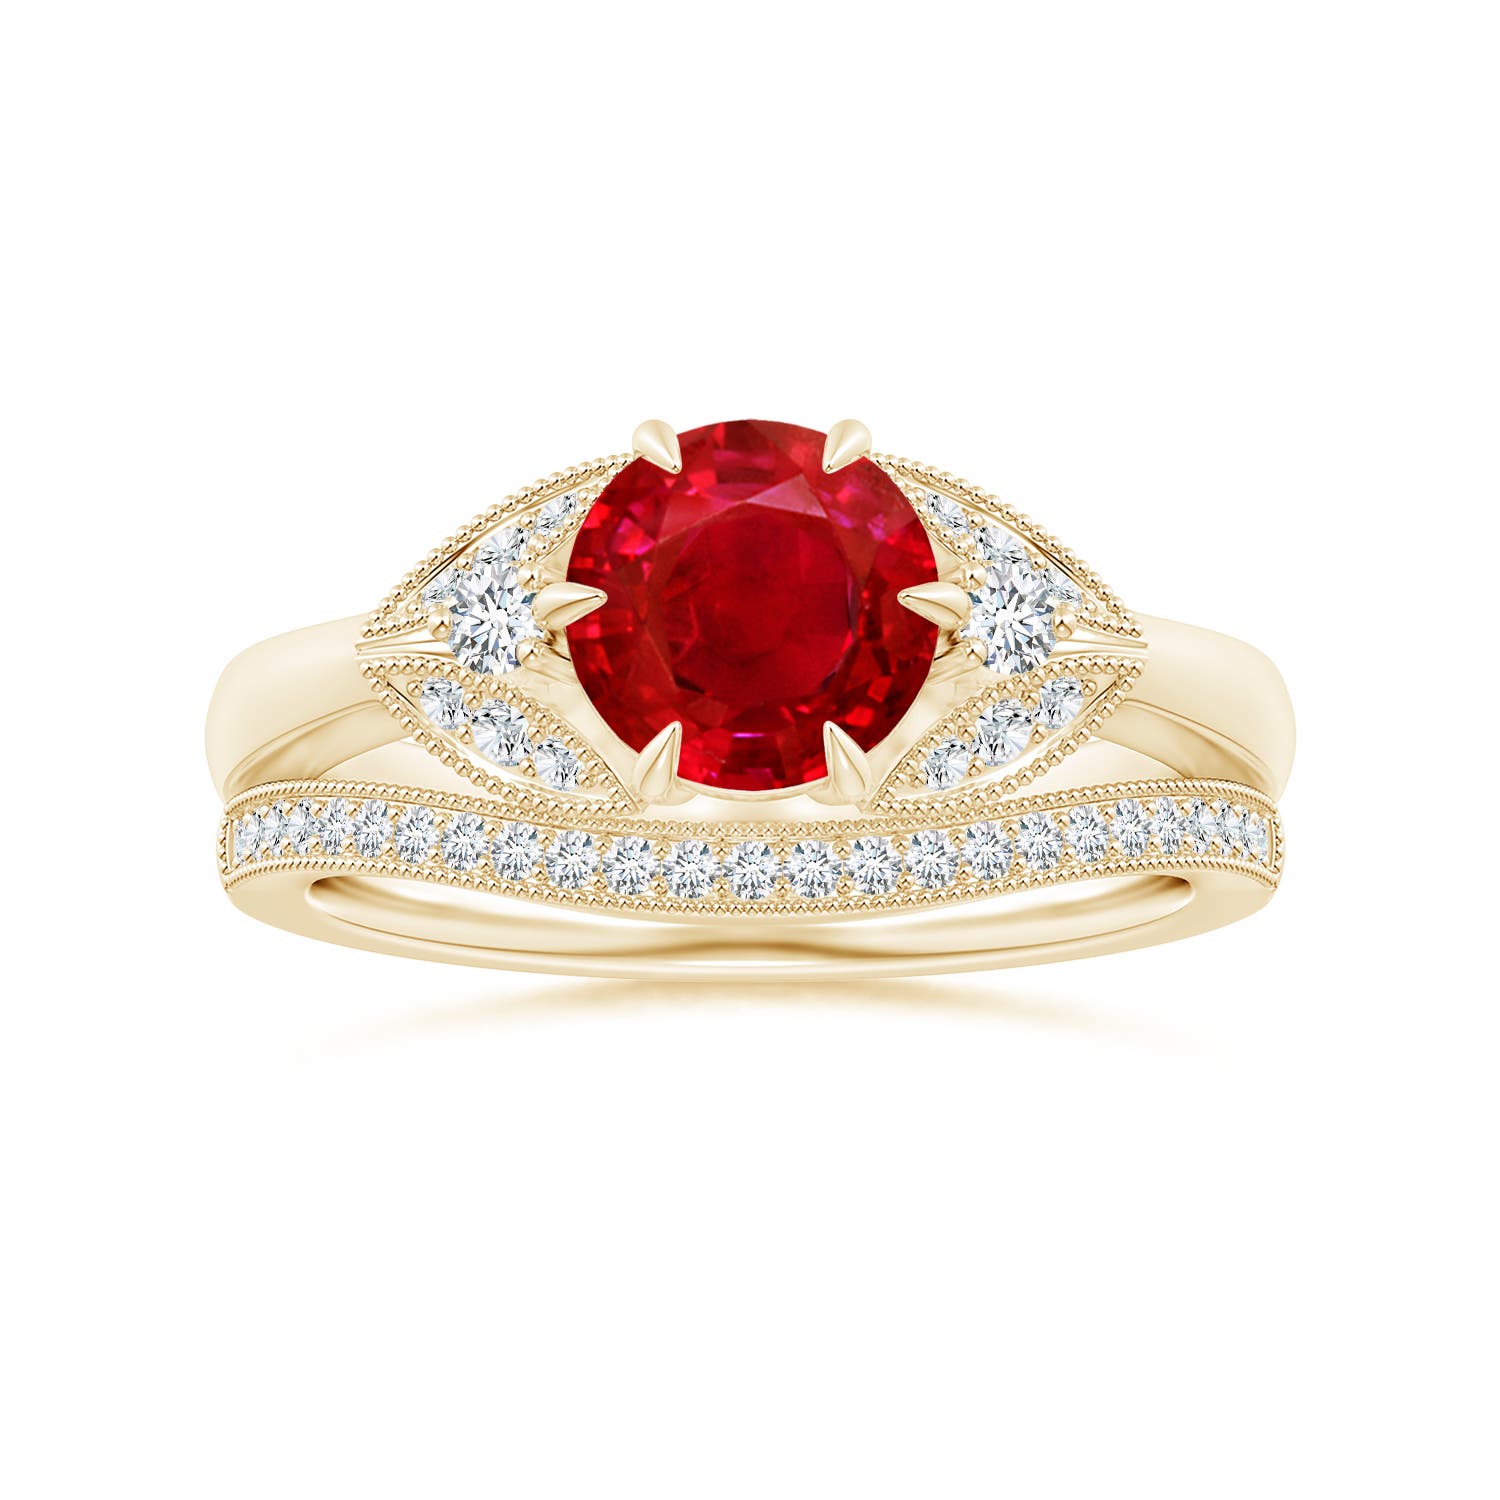 AAA - Ruby / 1.64 CT / 14 KT Yellow Gold